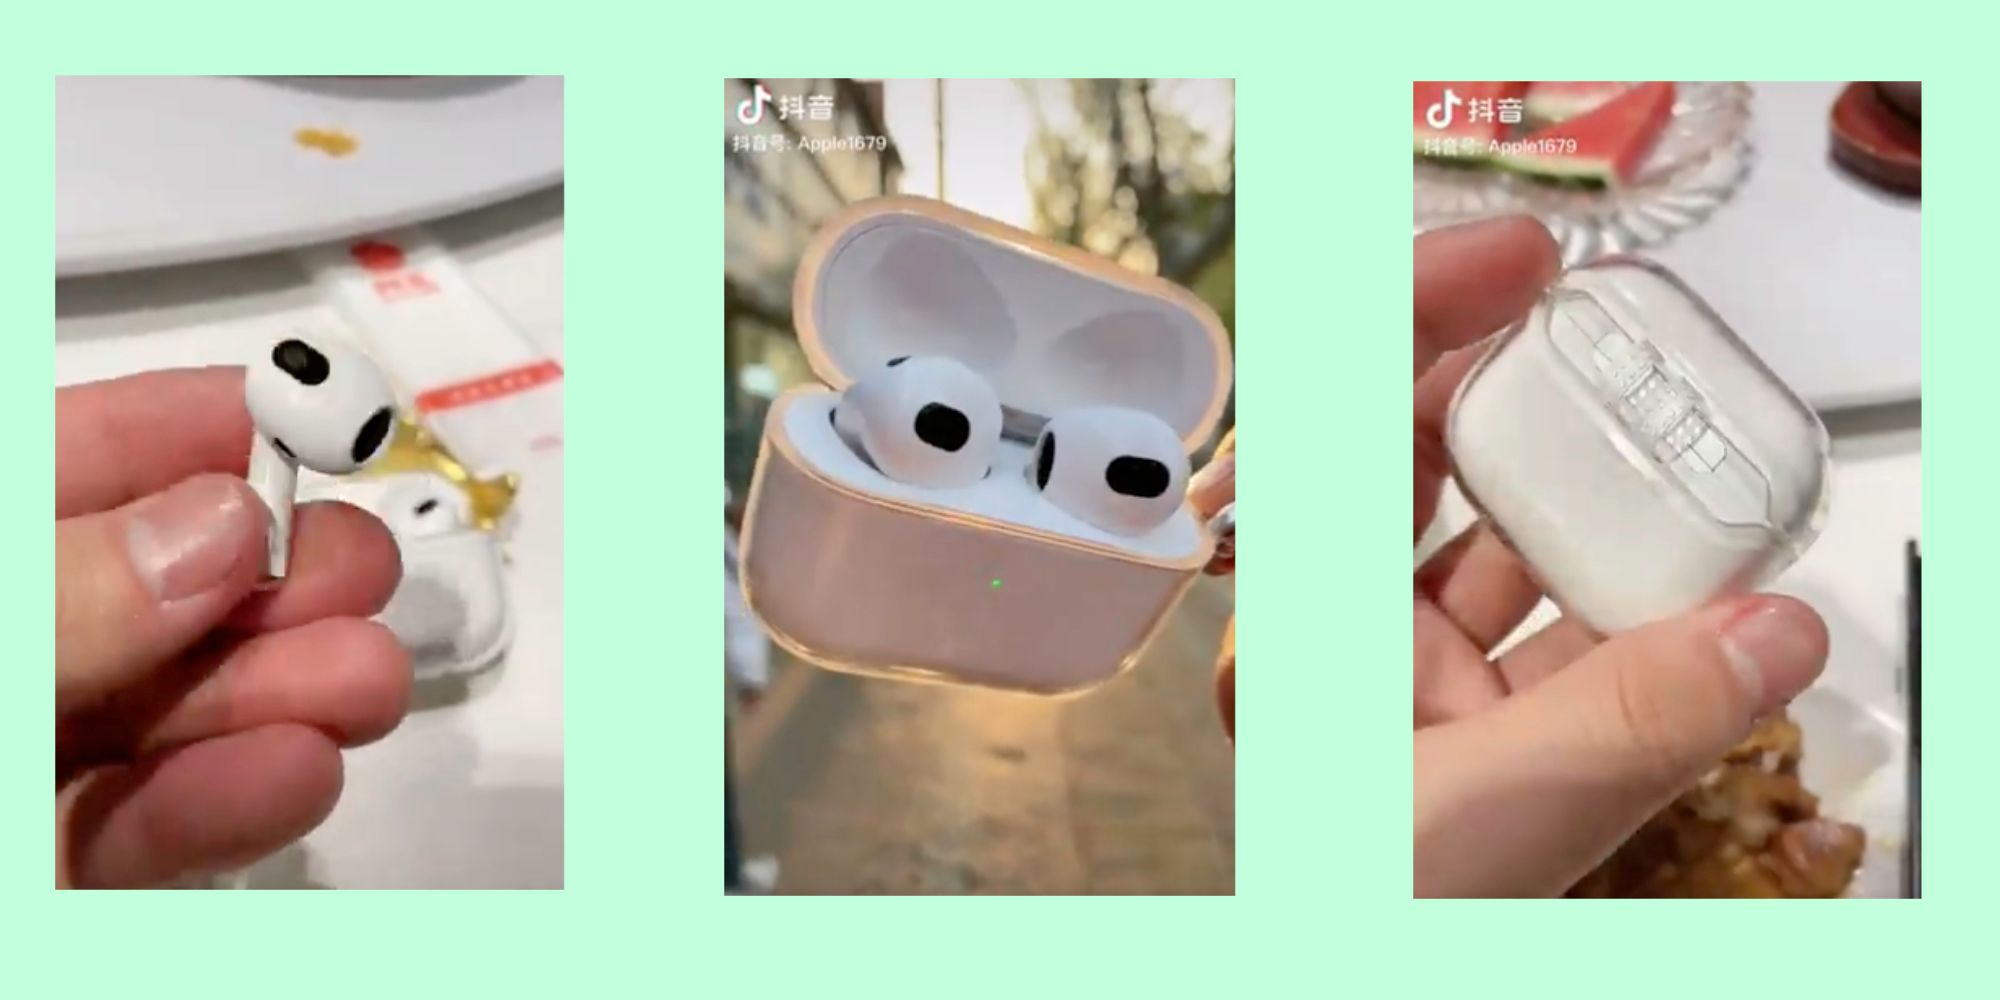 Fake AirPods 3 are already out ahead of the real deal!